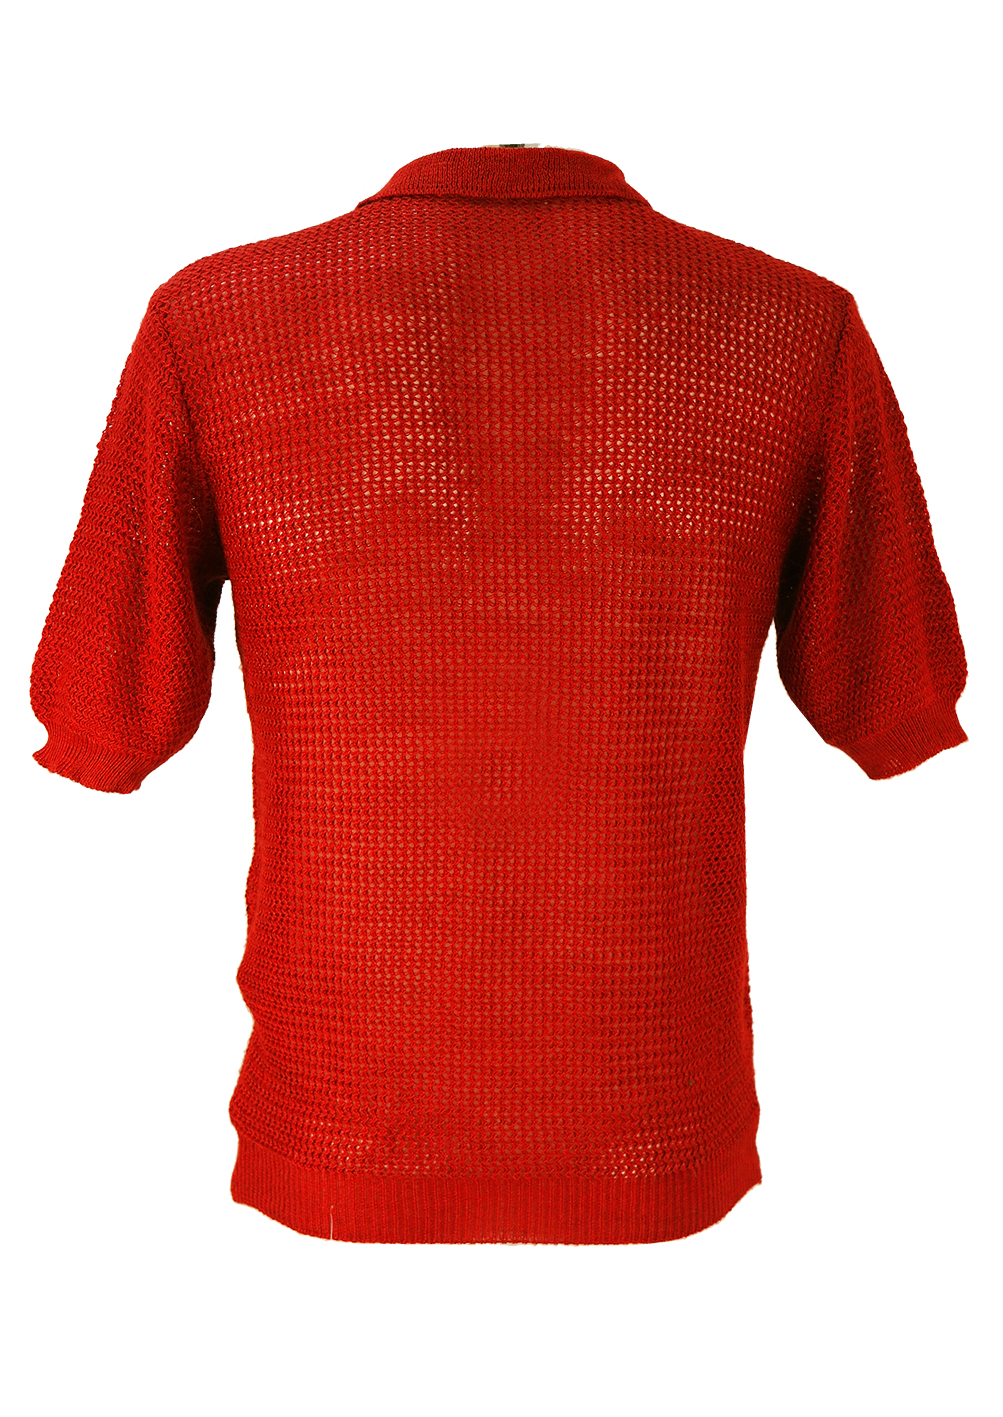 60's Style Mesh Knit Russet Polo Shirt - M | Reign Vintage